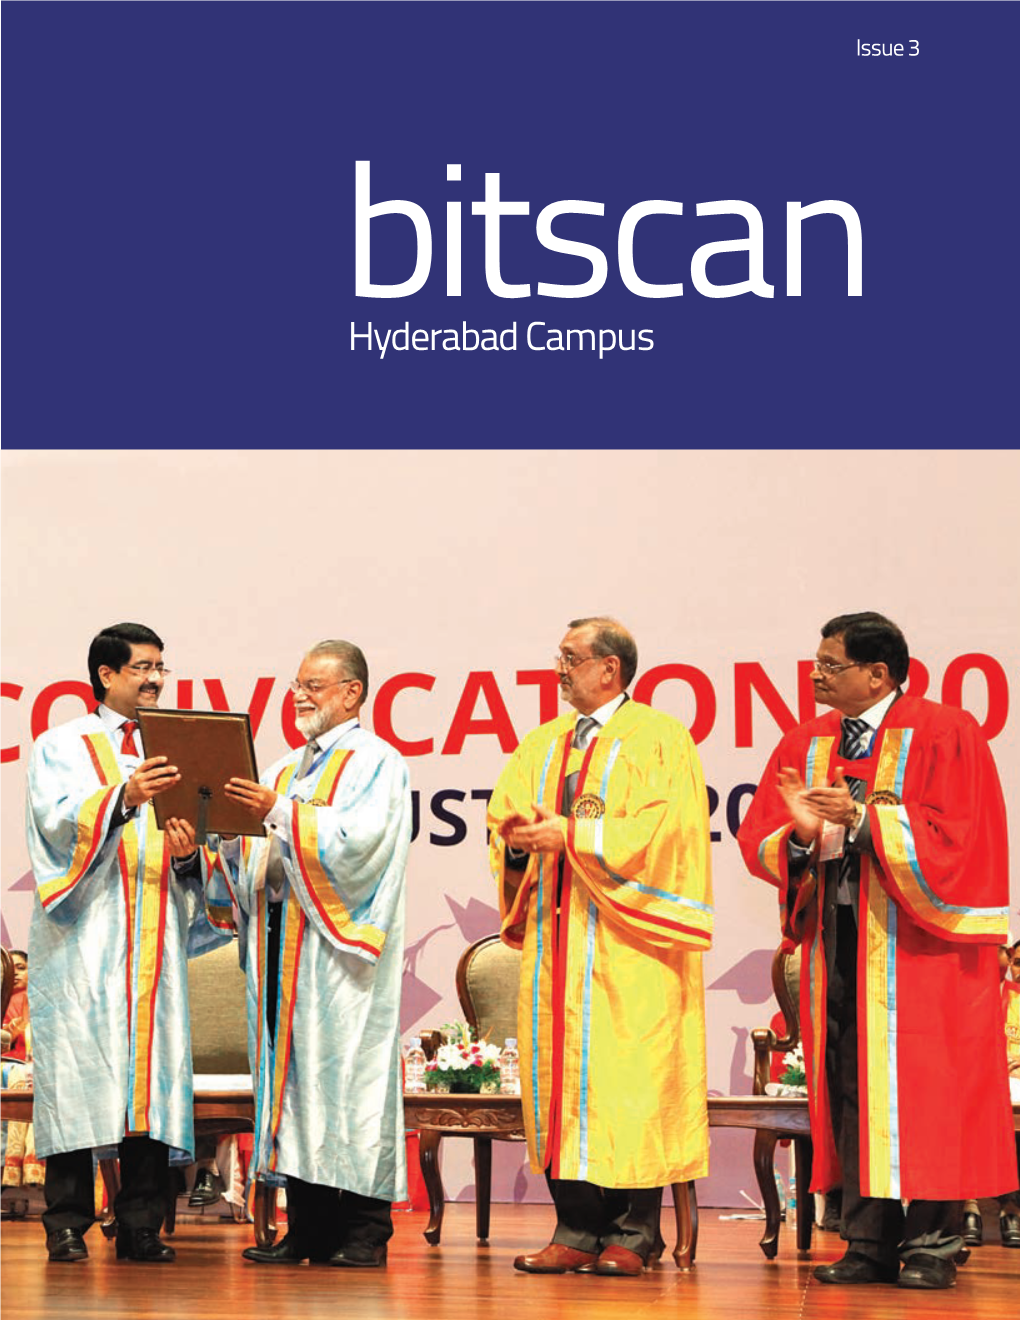 Hyderabad Campus Eminence Graces the Campus